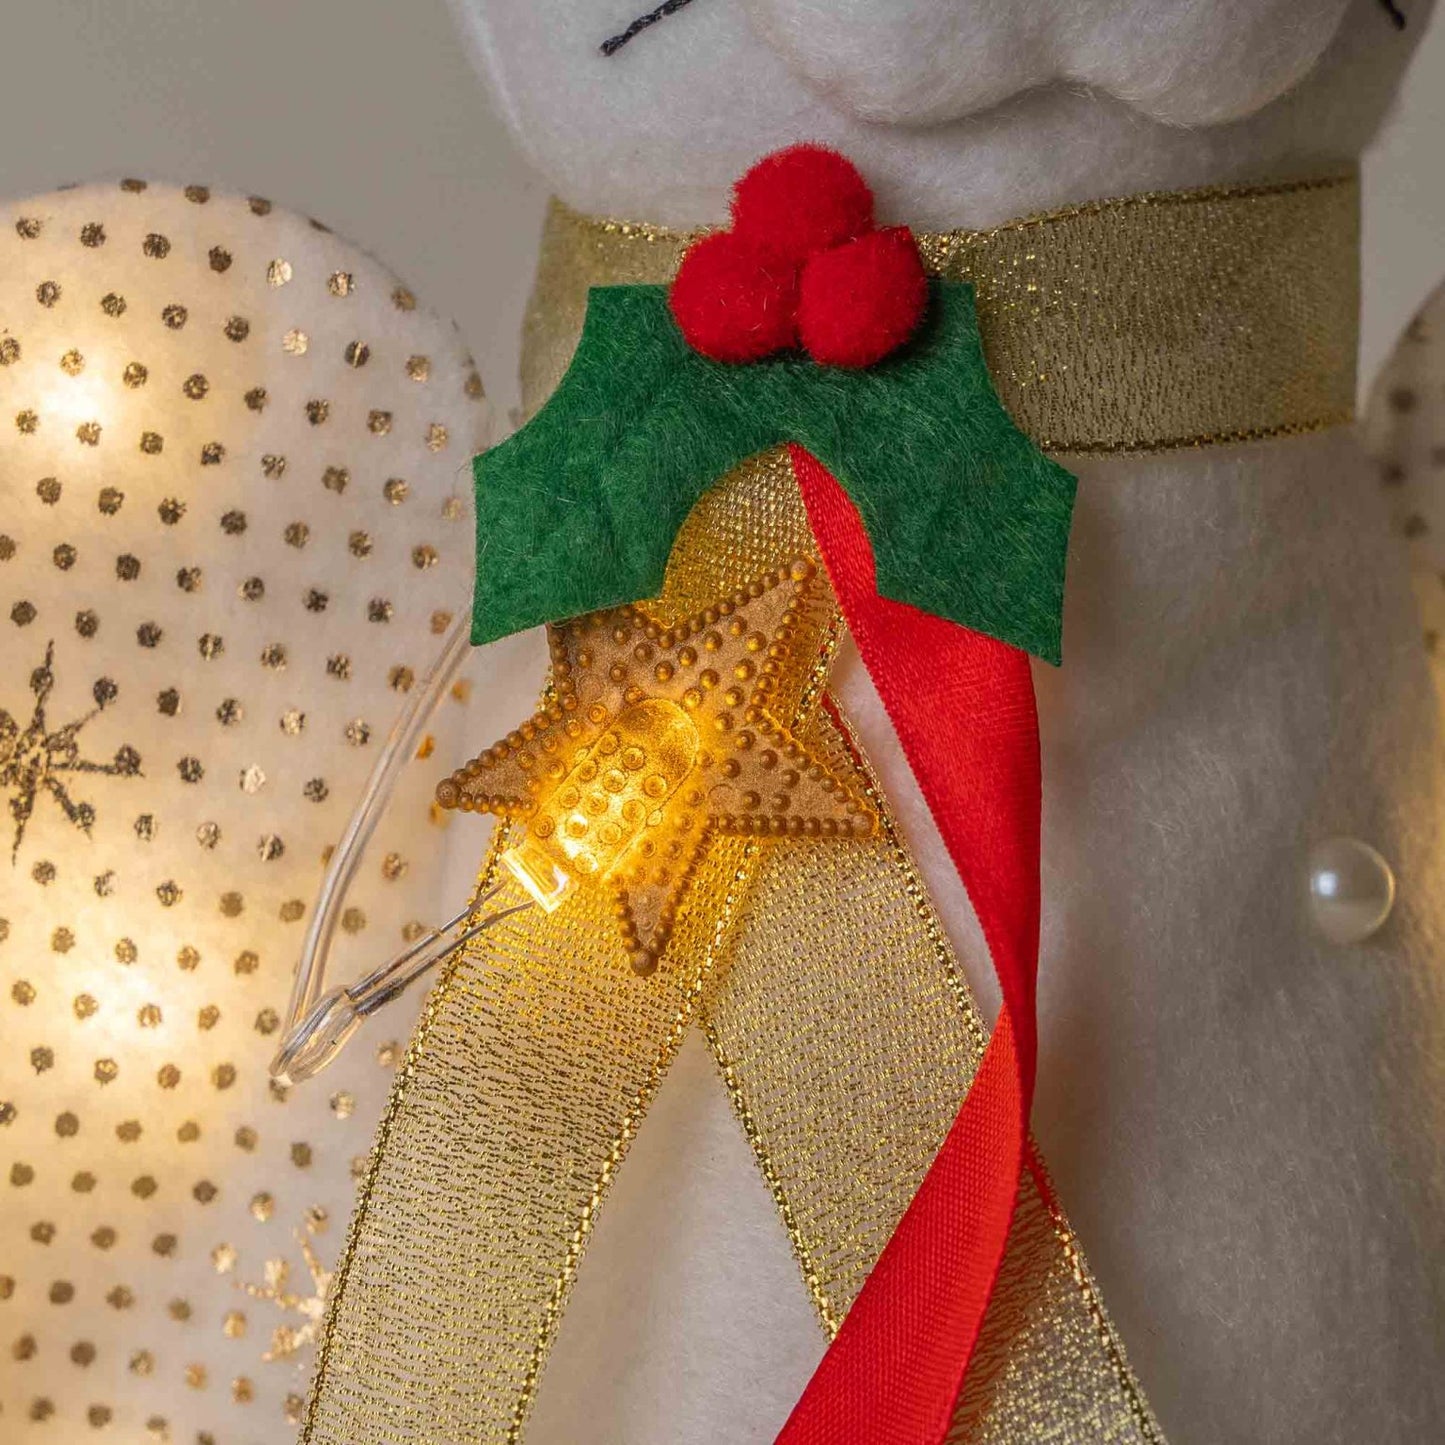 Limited Time Early Bird Offer-A ‘Christmas Miracle’ Angel Cat Tree Topper with Golden Sparkle Lighted Wings - Helps Feed 30 Hungry Shelter Cats in Need